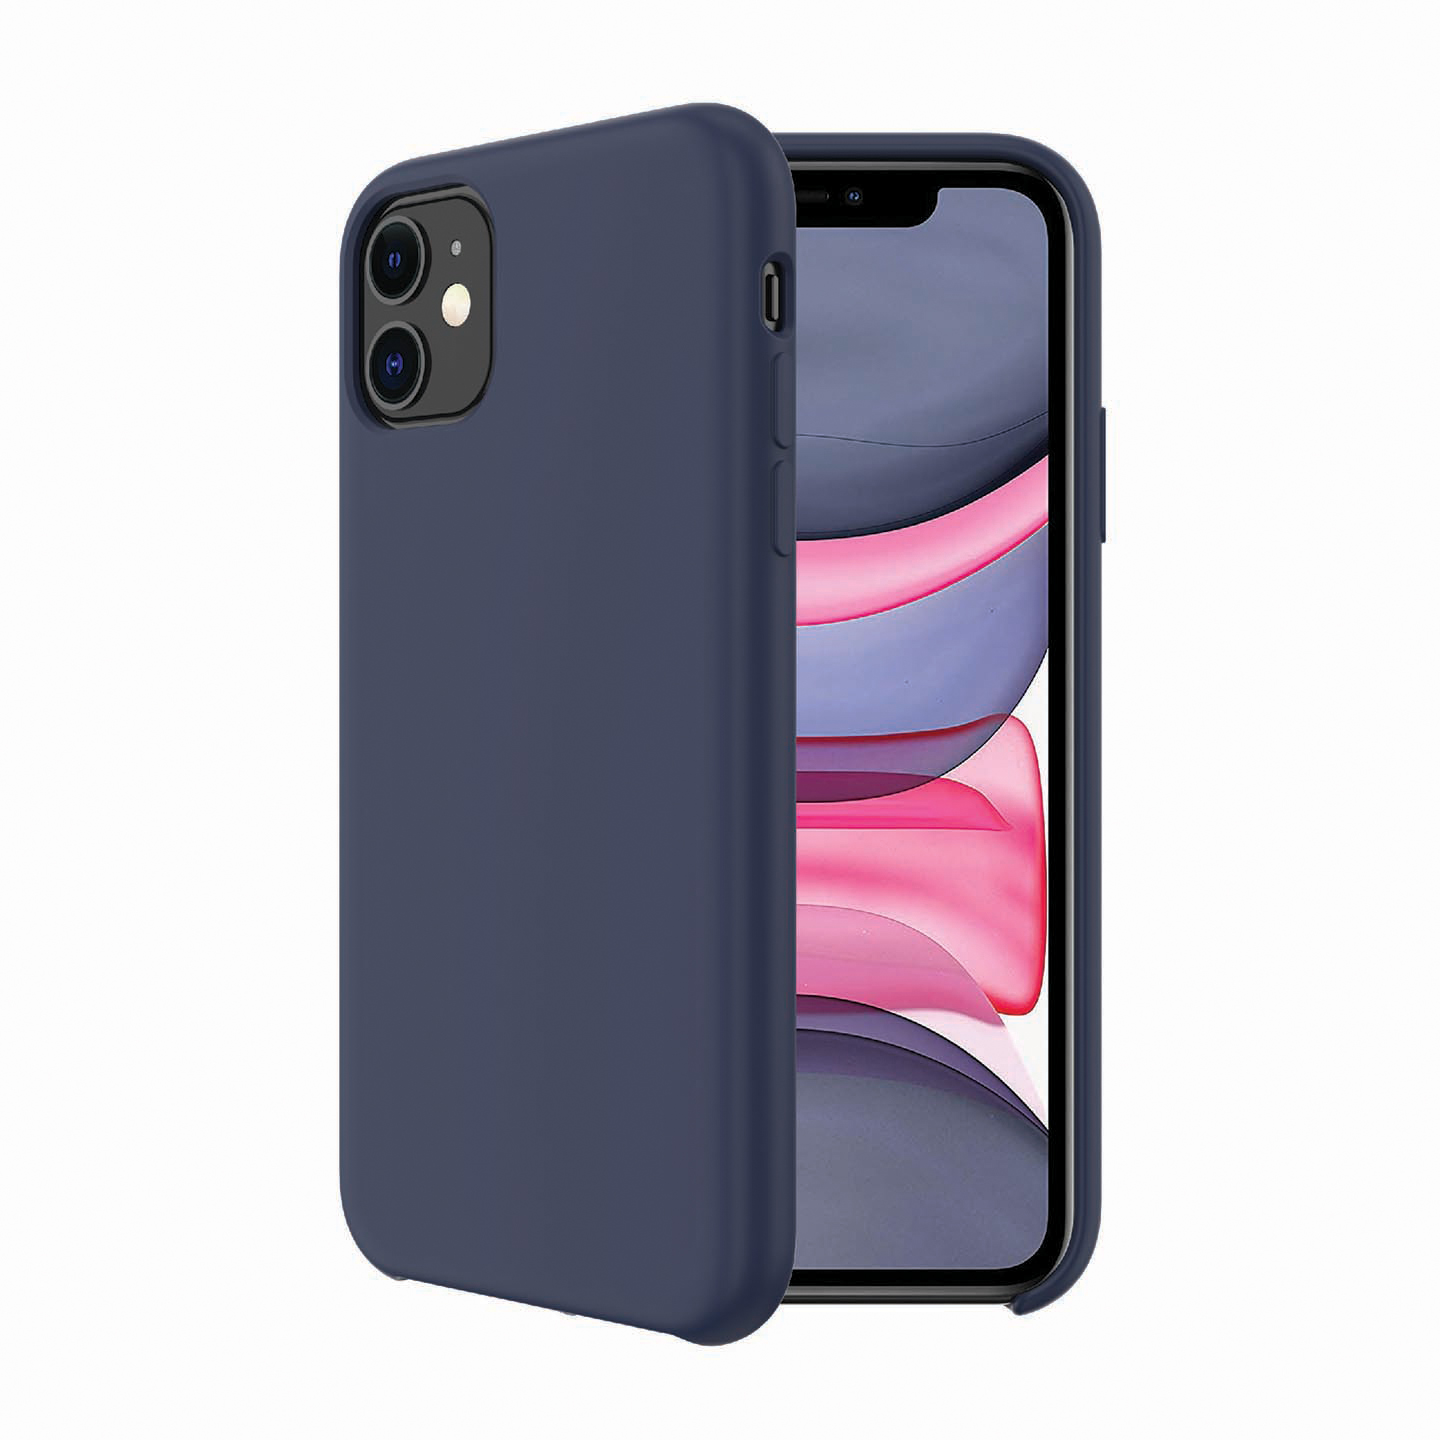 onn. Silicone Phone Case for iPhone 11, iPhone XR - image 2 of 6